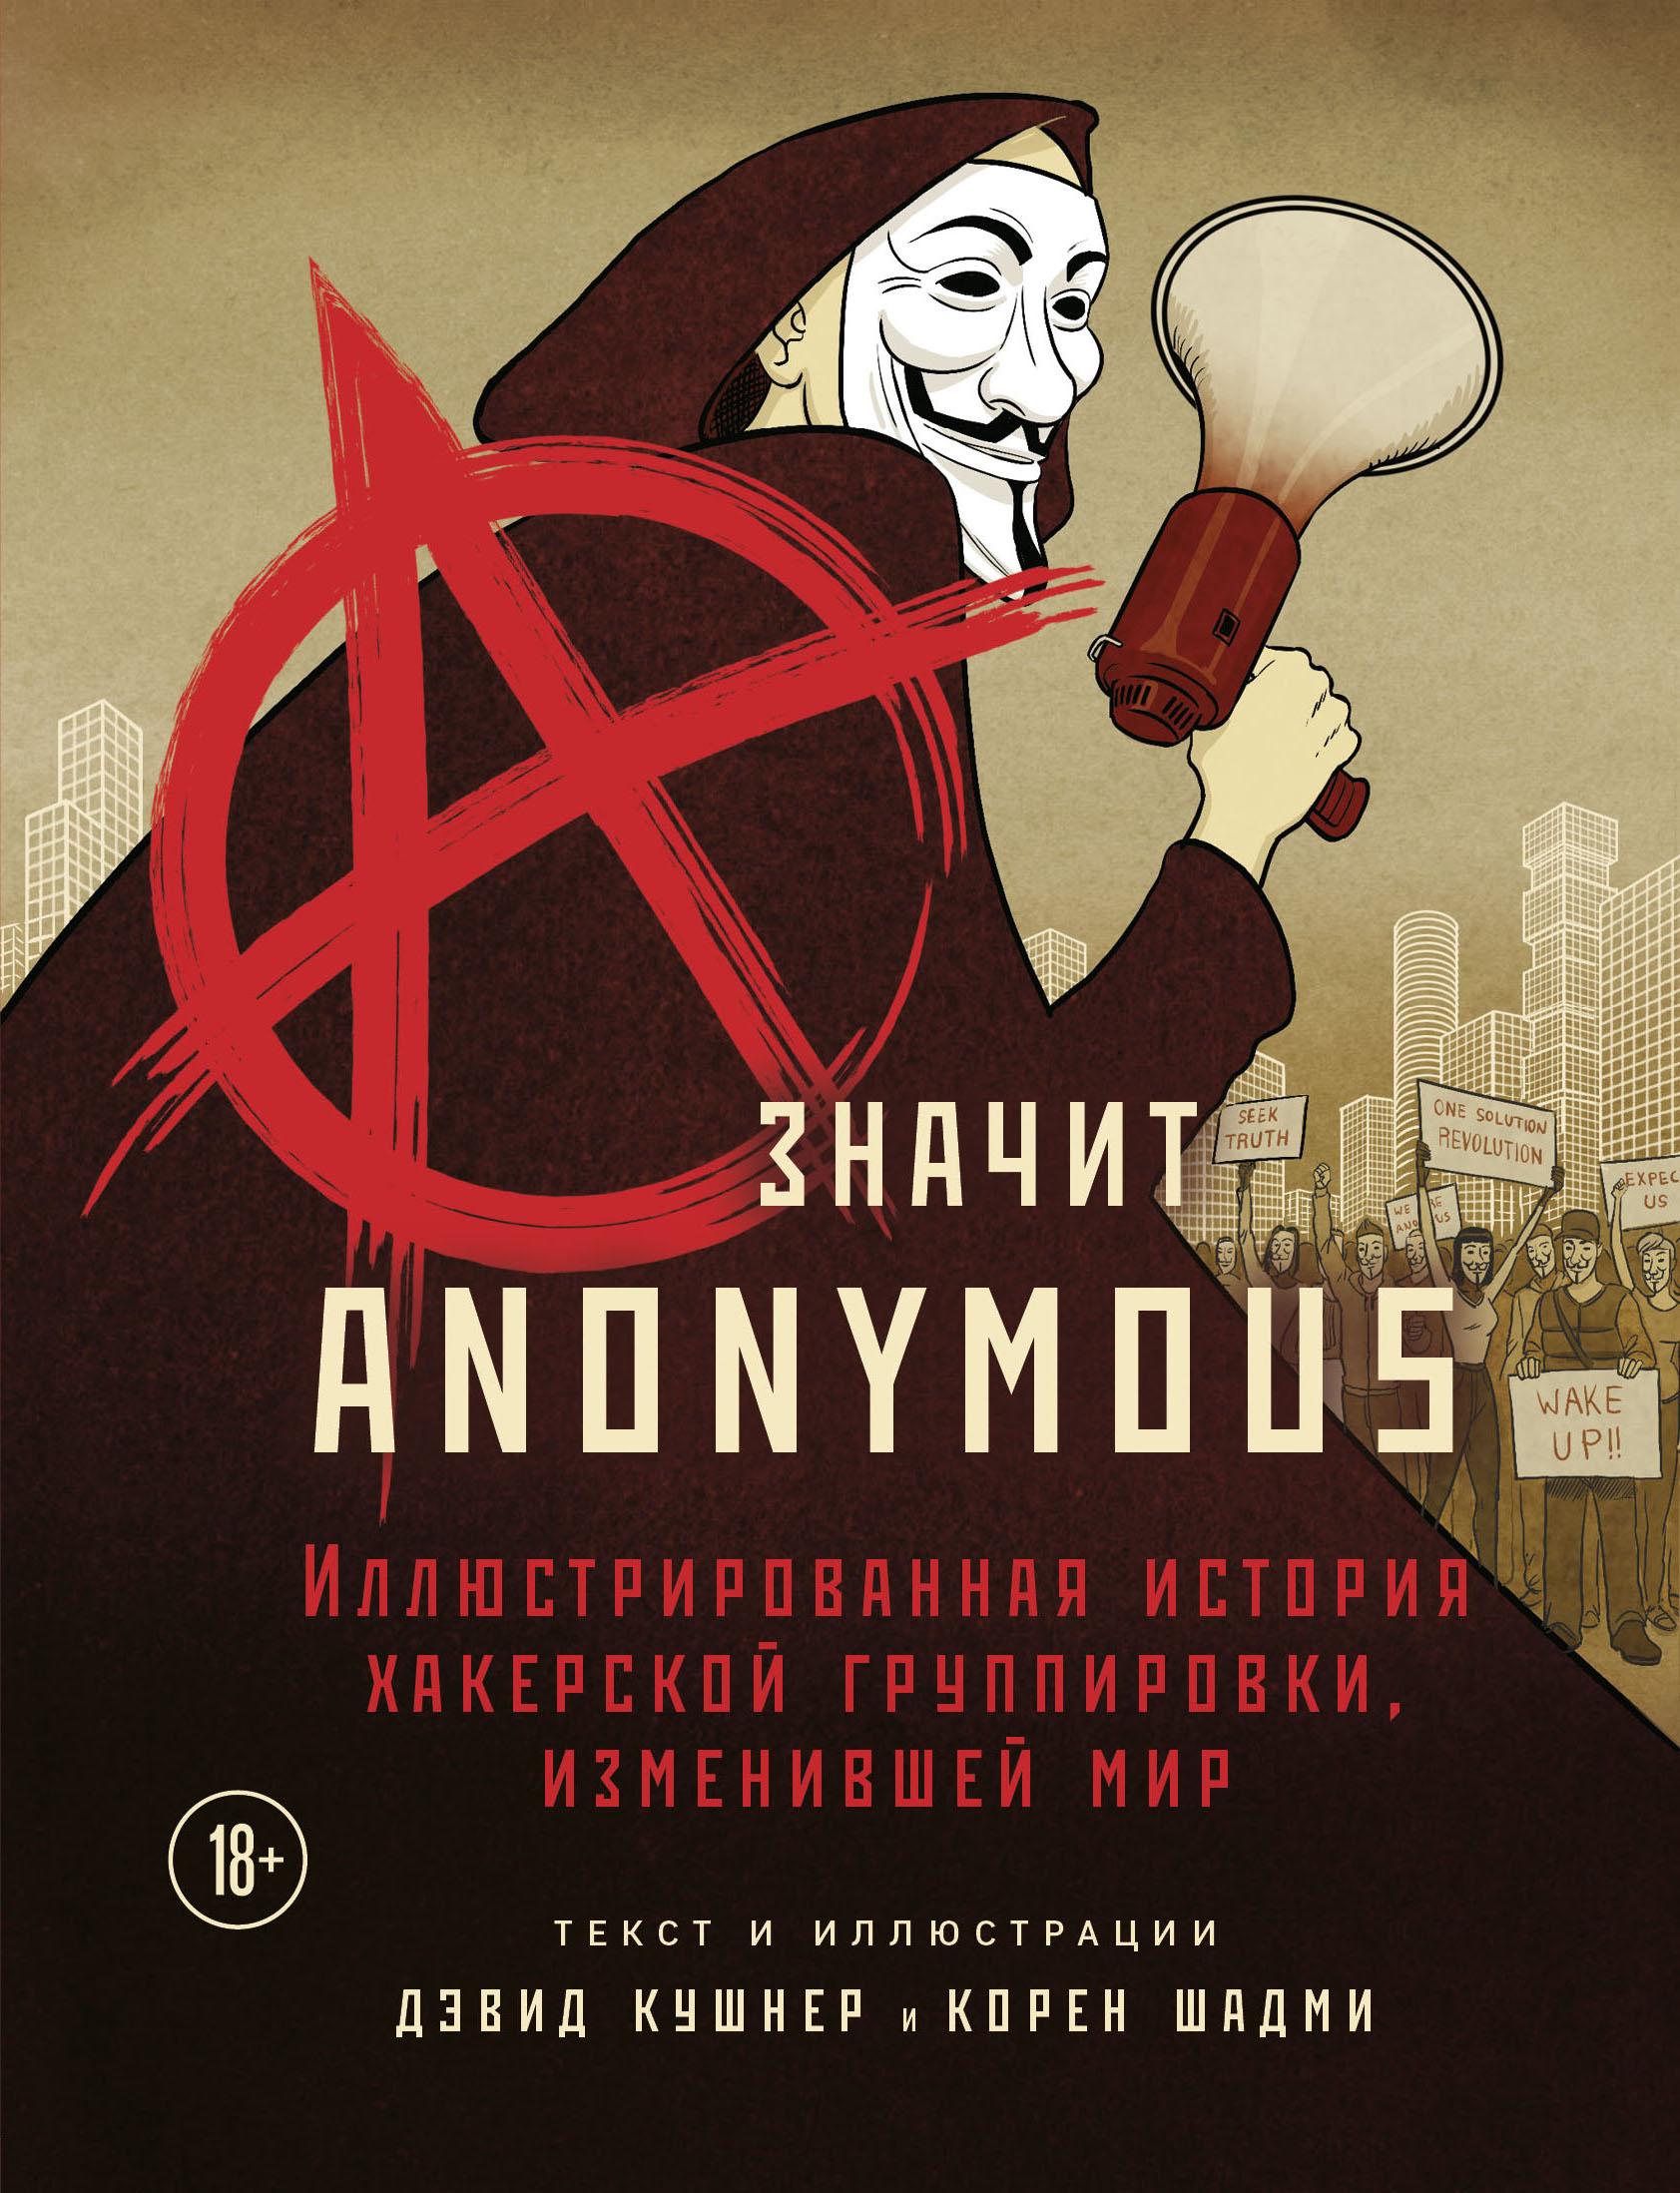 A   Anonymous.    ,  